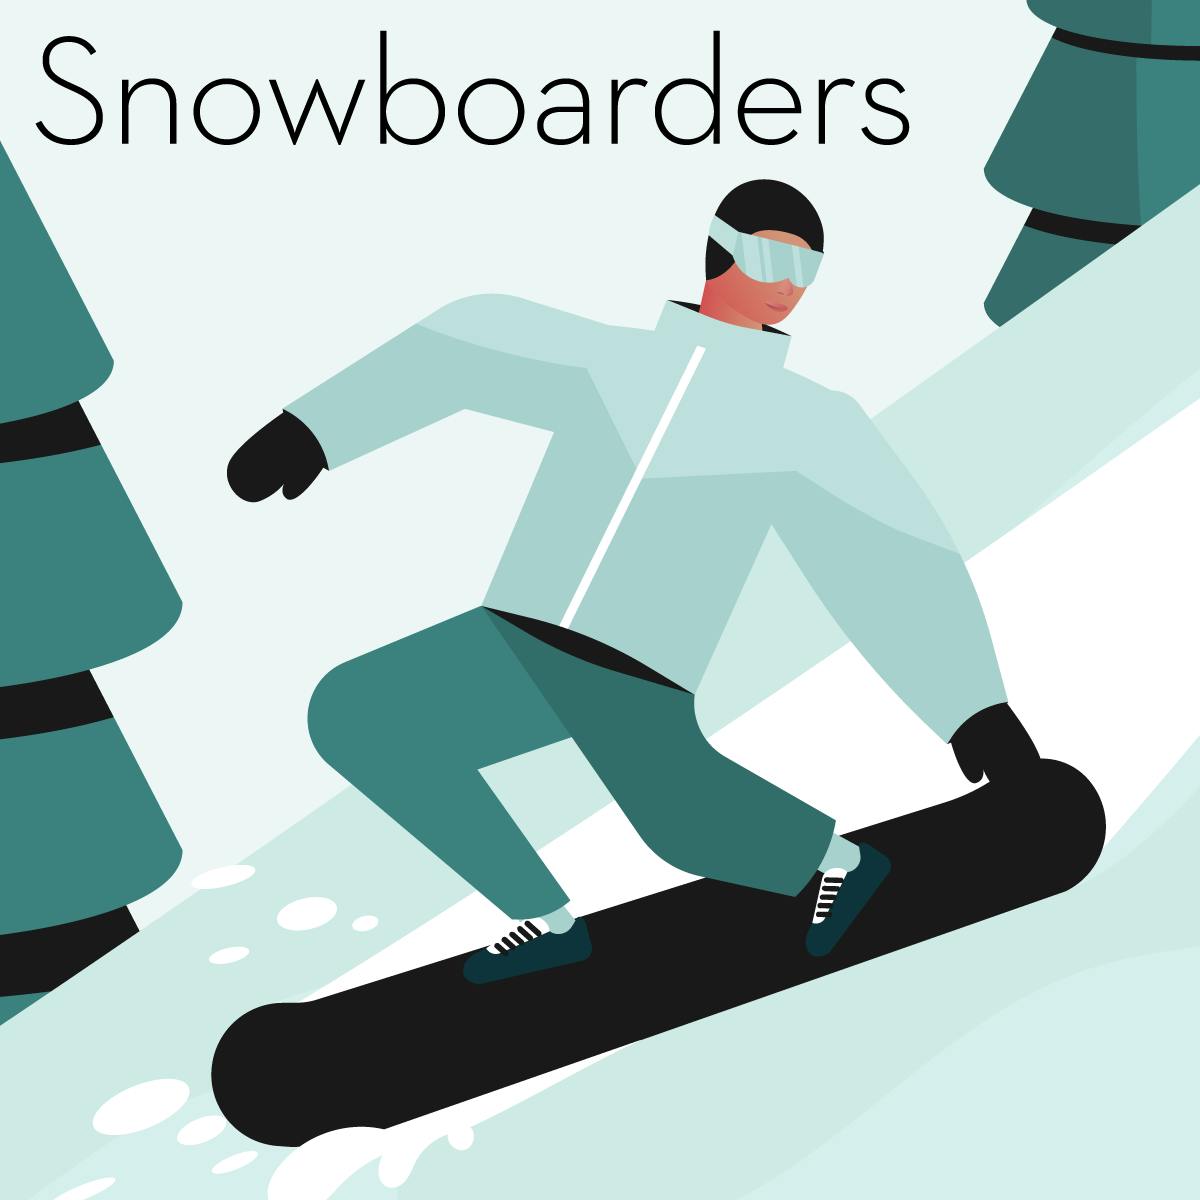 Illustration of a gift guide for snowboarders, snowing a person in goggles and insulated clothing snowboarding down a mountain.